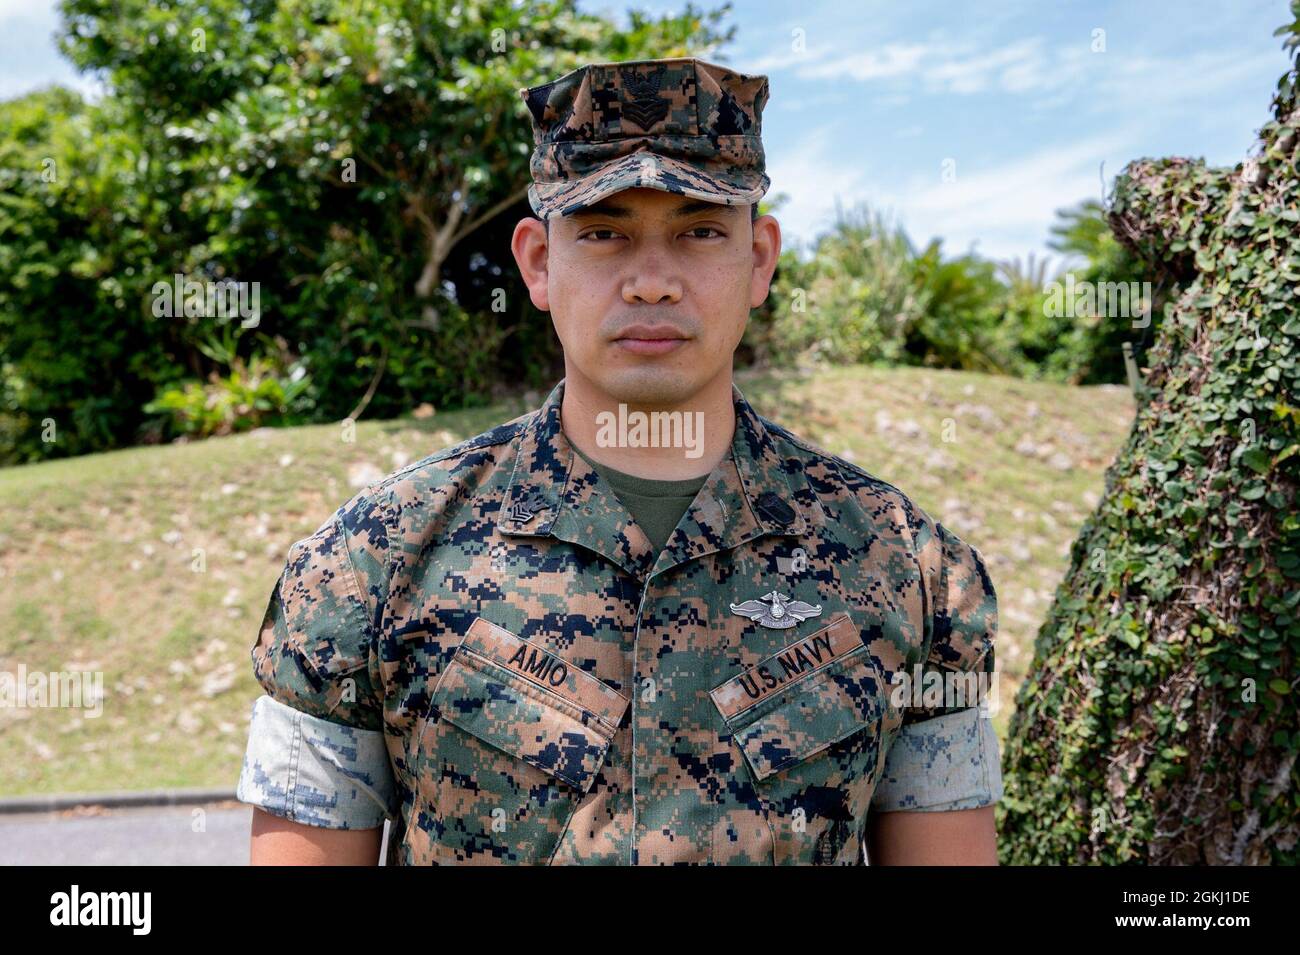 U.S. Navy Petty Officer 1st Class Juan P. Amio, a preventive medicine technician with 3rd Marine Expeditionary Brigade, poses for a photo on Camp Courtney, Okinawa, Japan, April 28, 2021.   “I’m originally from the Philippines. My family migrated in 1997 to Guam, and we were there for three years. From there my family migrated to Virginia Beach, and that’s where I was recruited. I joined a little later, at 21, because I figured I’d go to school first but found that school wasn’t for me. I had to find a better aspect of what I wanted to do with my life, and the Navy was it. I’ve been in the Nav Stock Photo